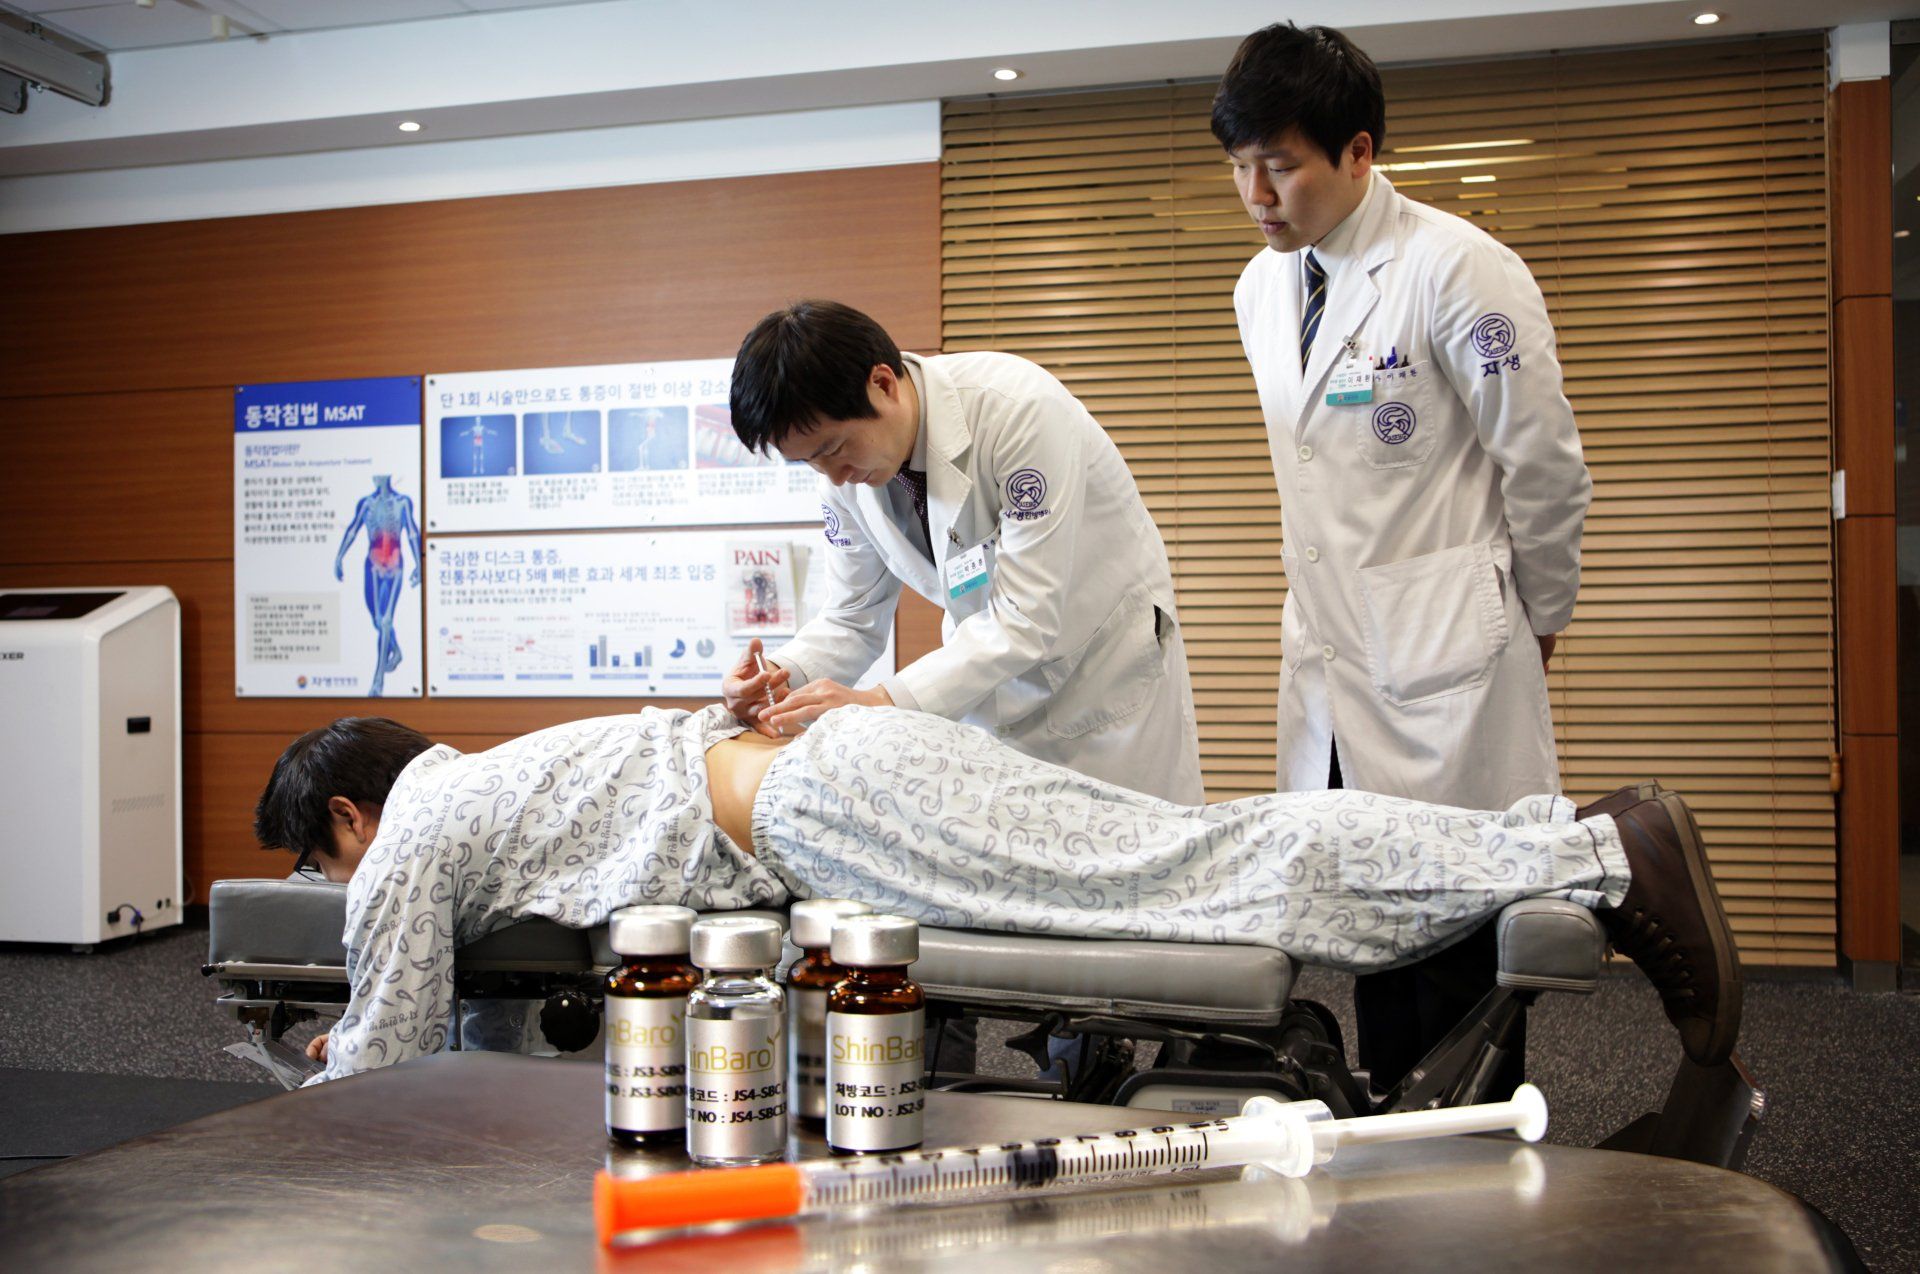 Most patients non-surgically treated for their spinal conditions: Jaseng Hospital of Korean Medicin